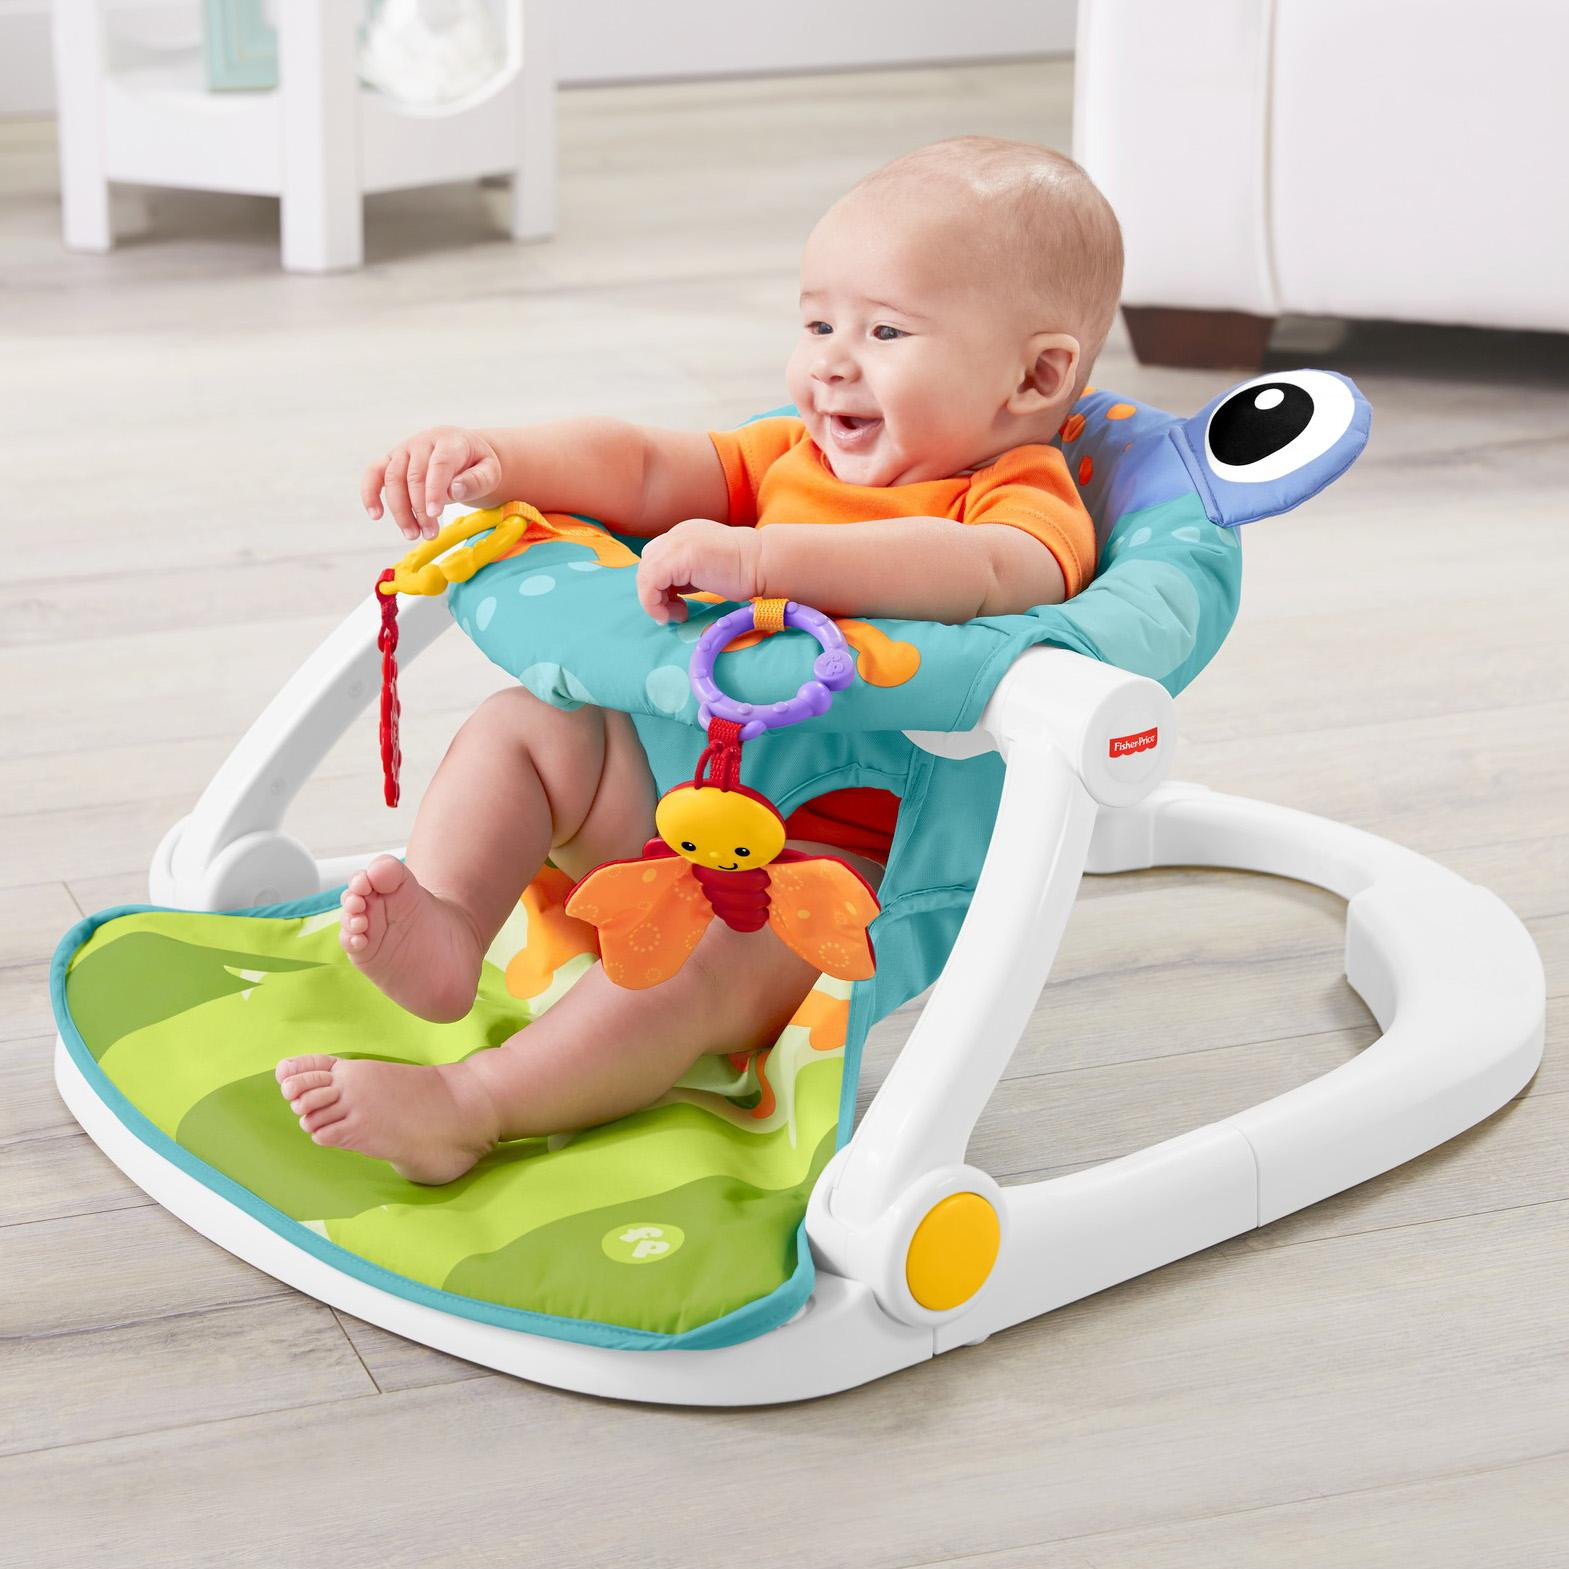 Best ideas about Baby Floor Seat
. Save or Pin Amazon Fisher Price Sit Me Up Floor Seat Infant Now.